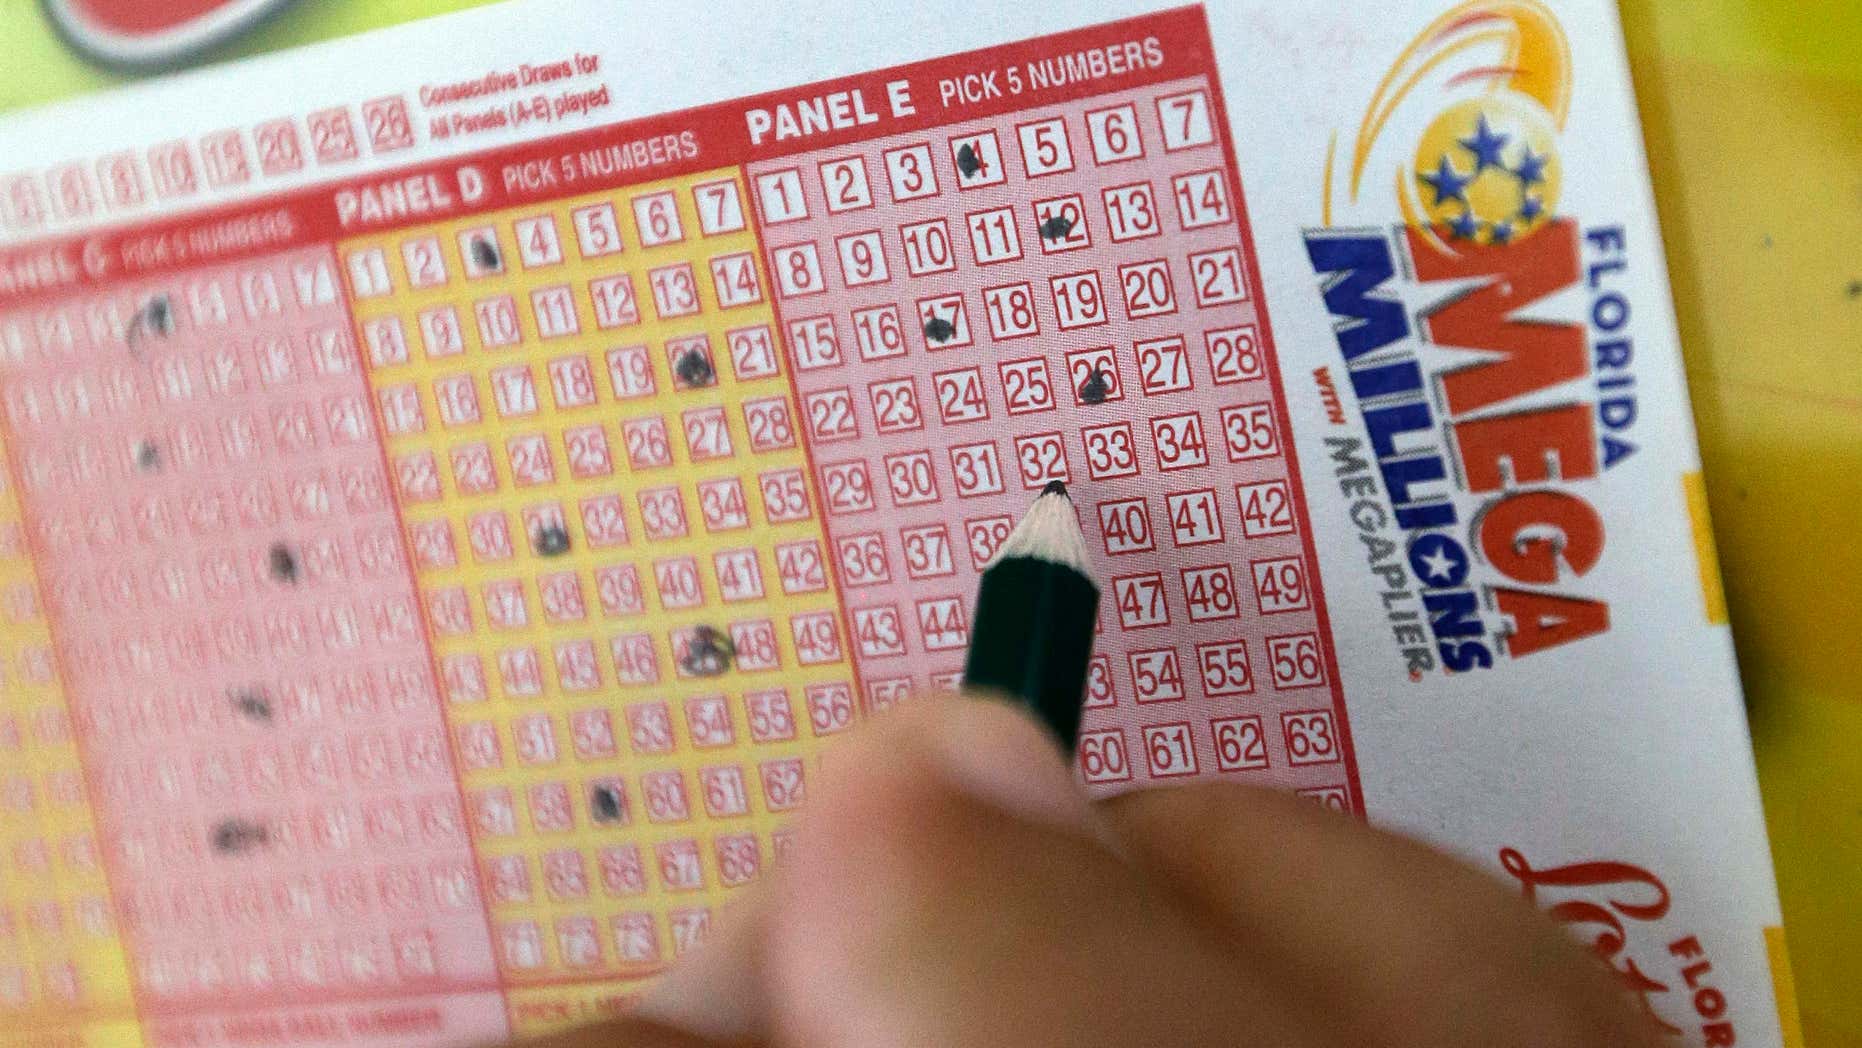 No winners in latest Mega Millions lottery drawing, jackpot jumps to